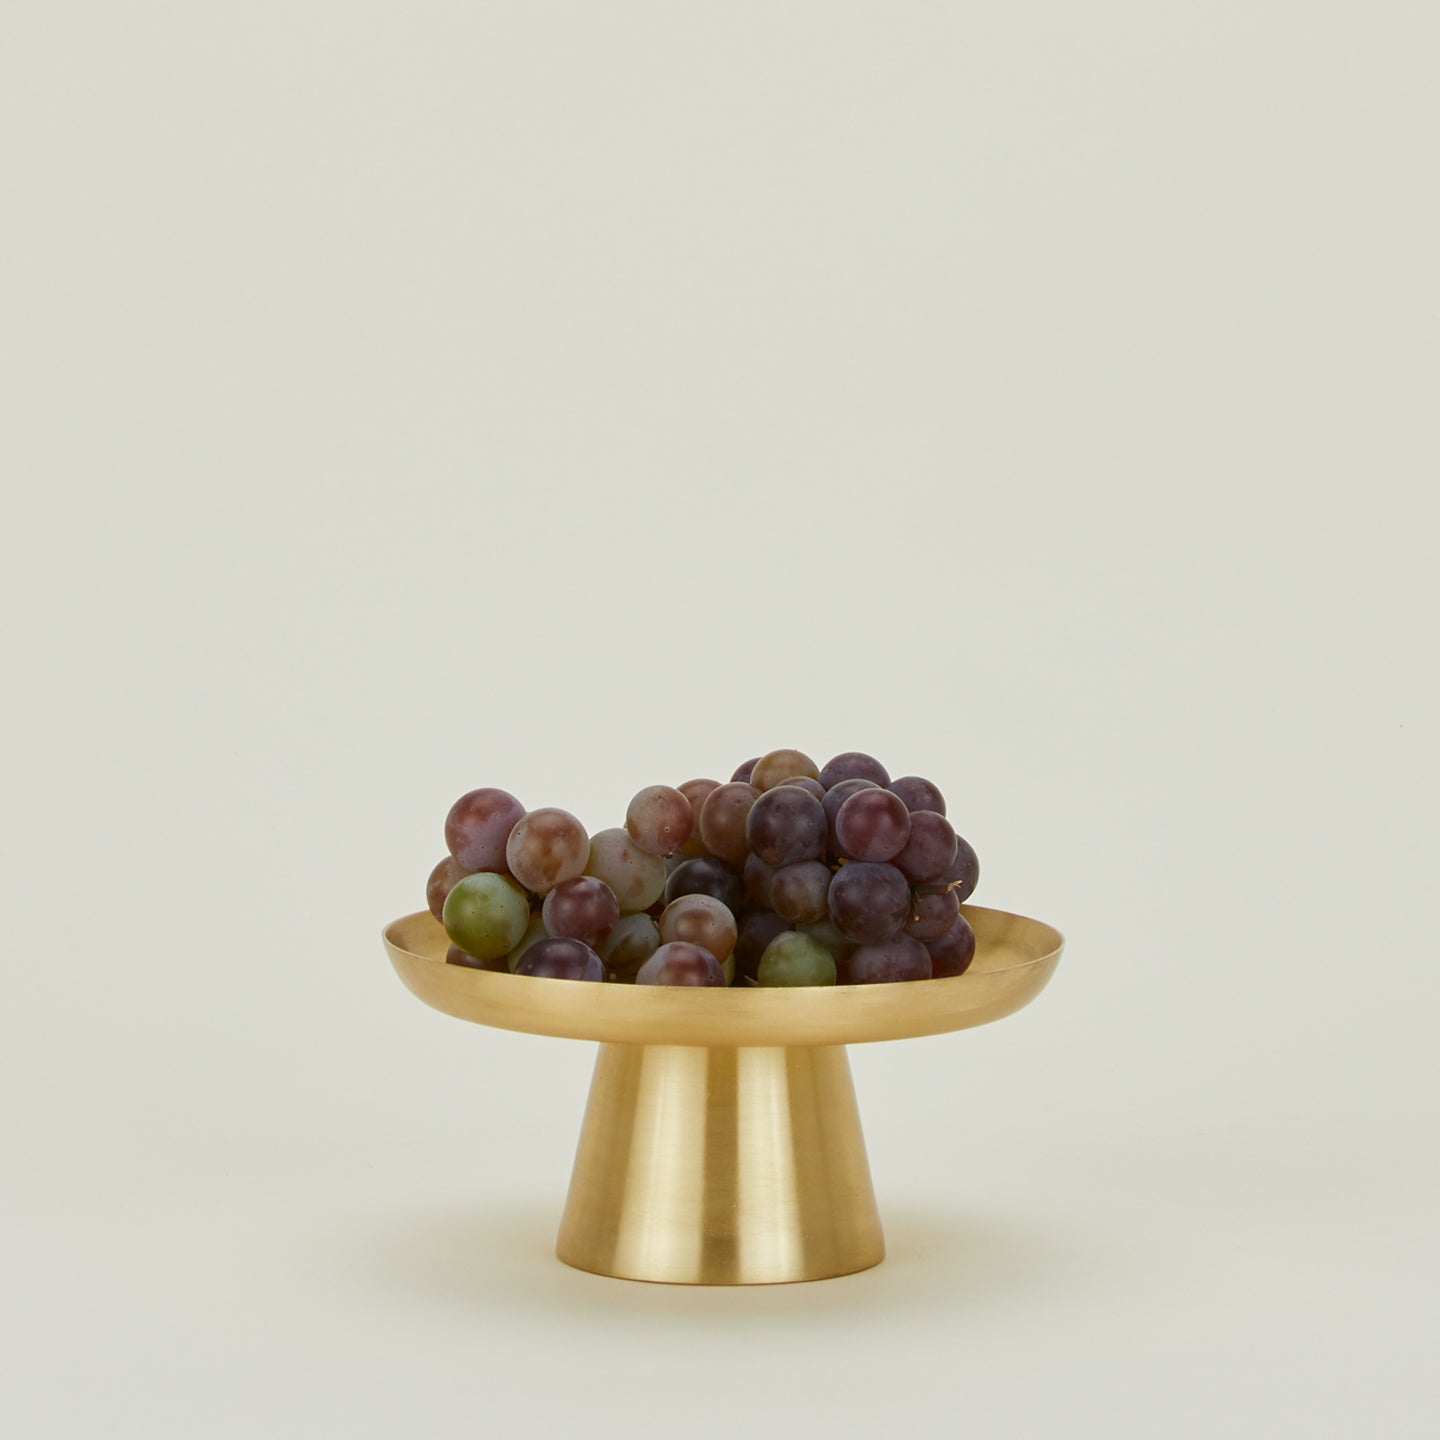 Brass Cake Stand in Small, with bunch of grapes.